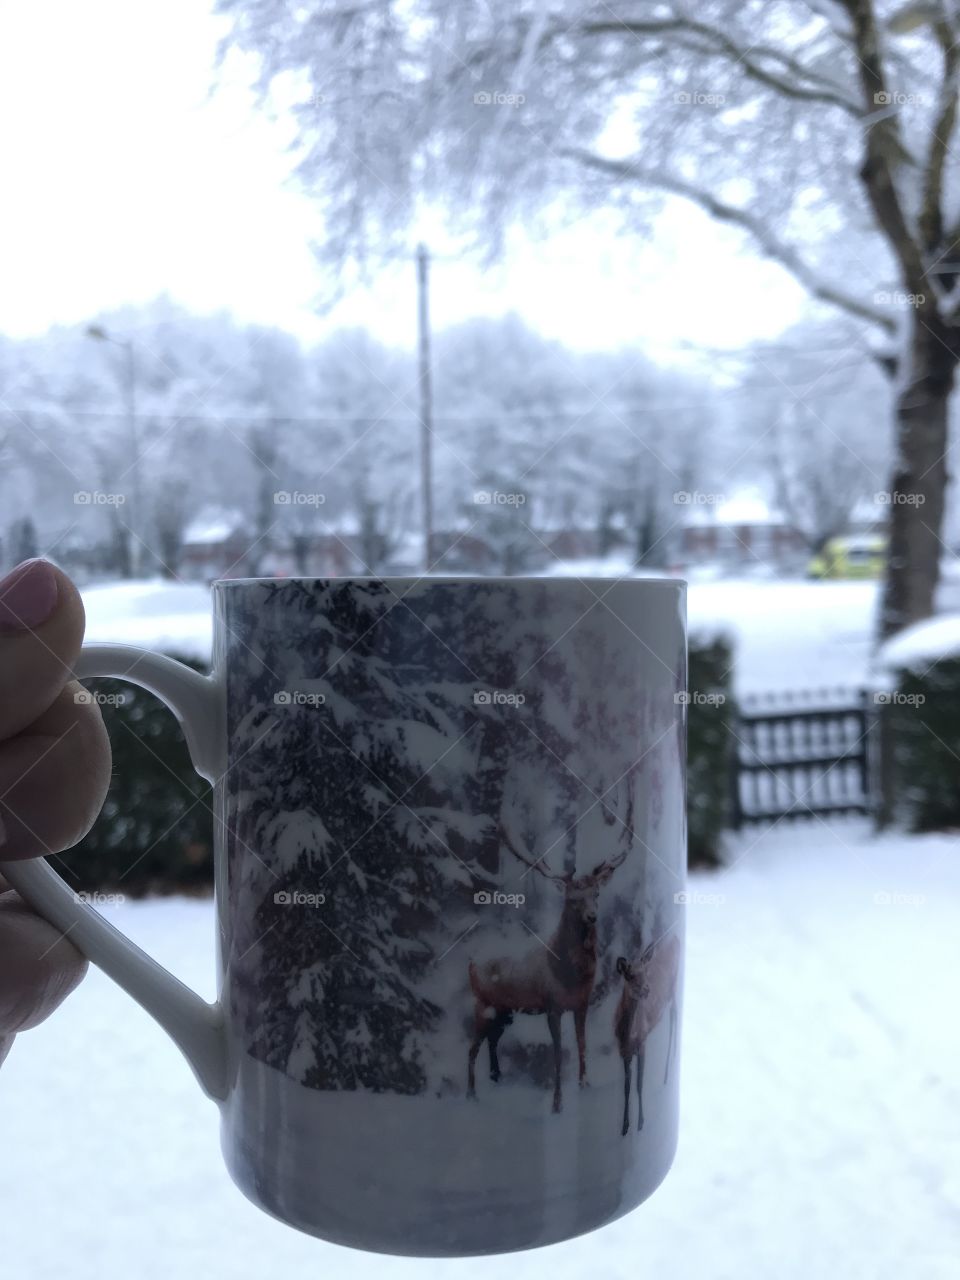 Morning brew in the snow